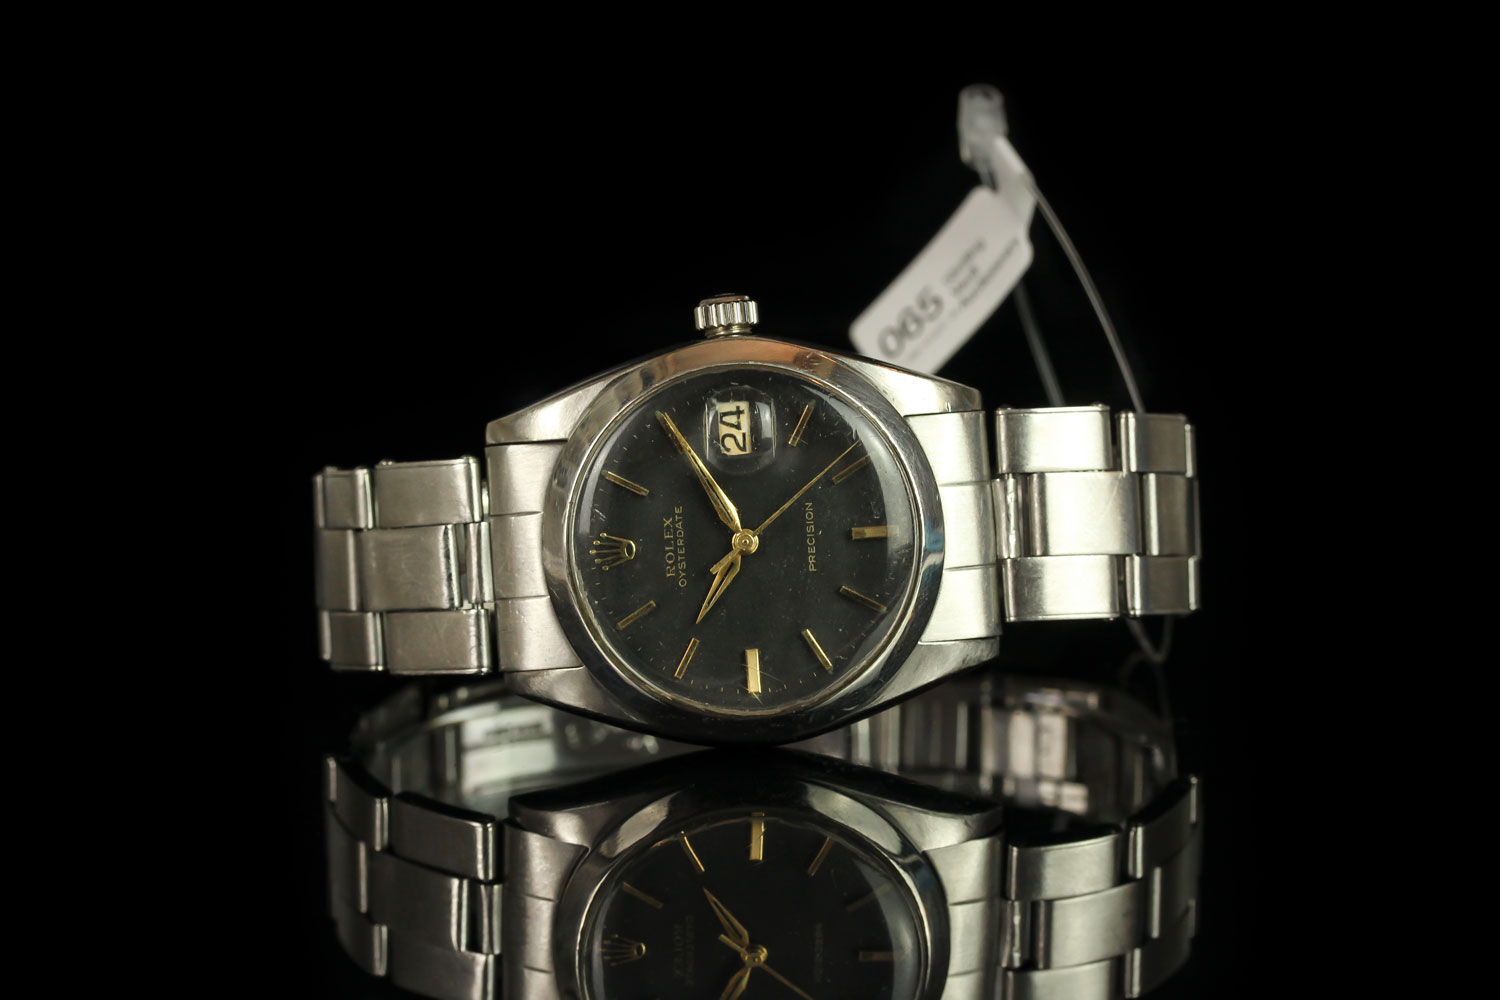 GENTLEMENS ROLEX OYSTERDATE PRECISION REF. 6694, circular black dial with gold hour markers and